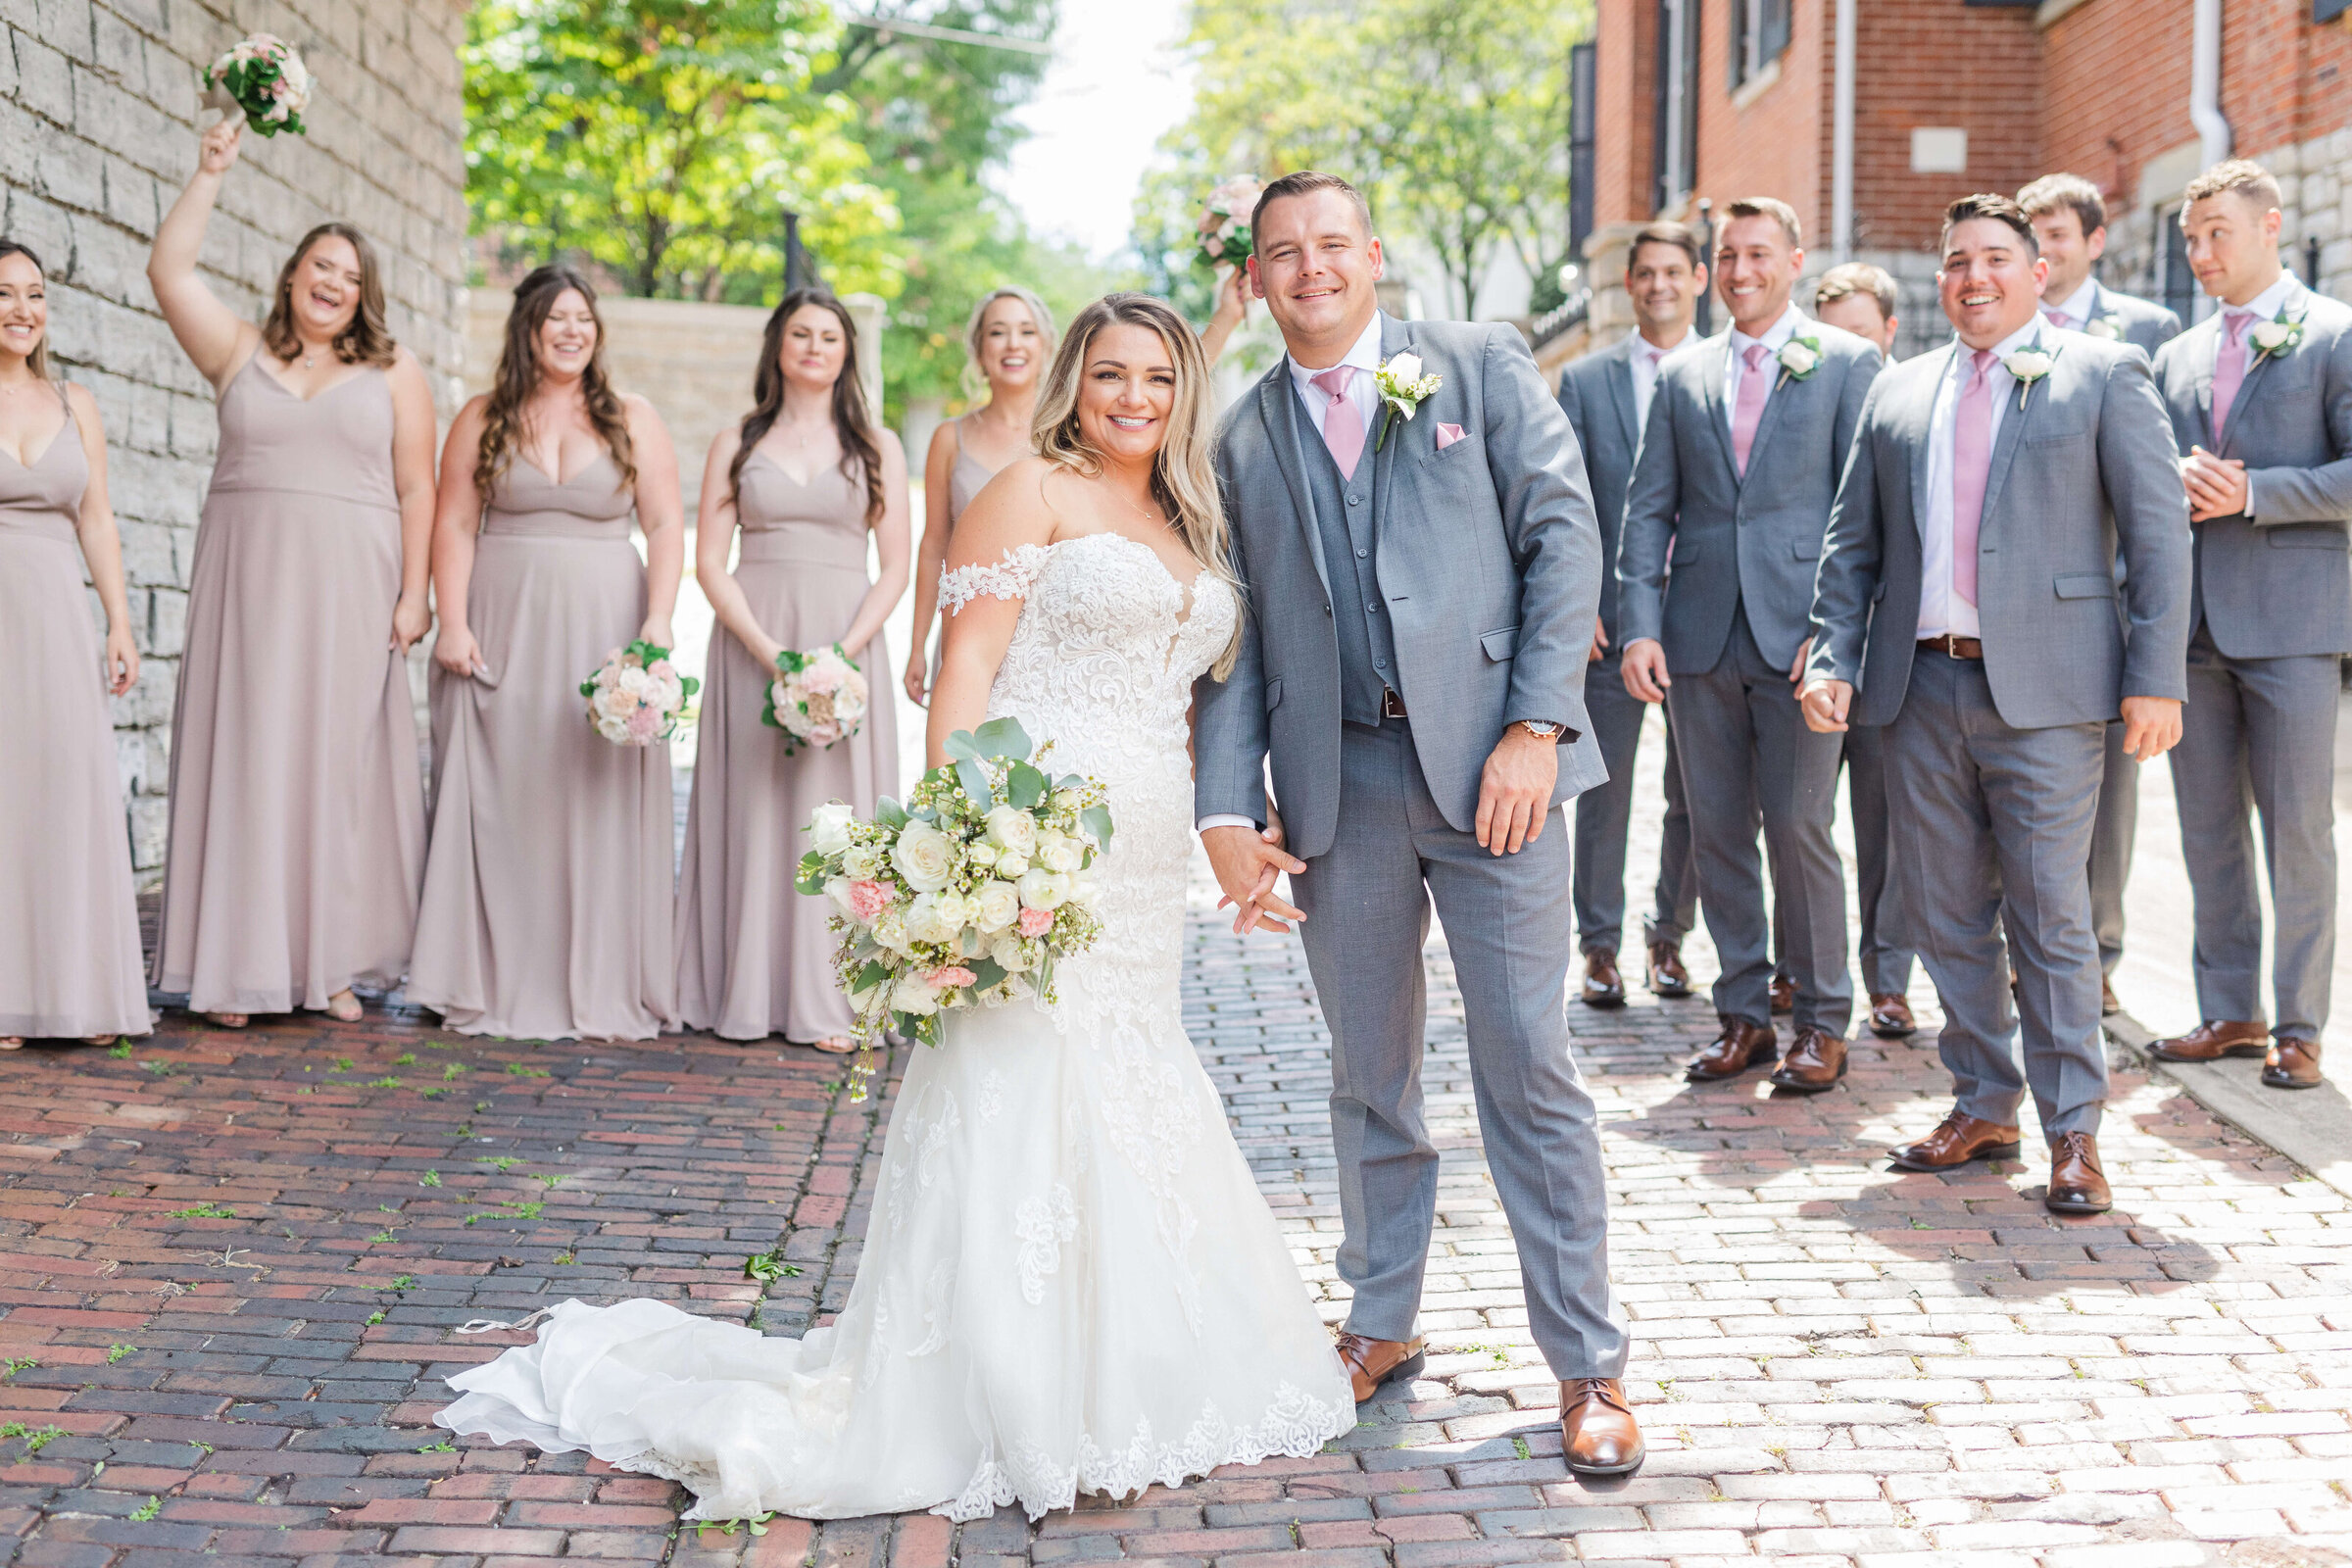 A bride and groom smile at the camera while their bridal party walks in back of them. They are on cobblestone in the summer time. The bridesmaids are wearing taupe and the groomsmen in grey.